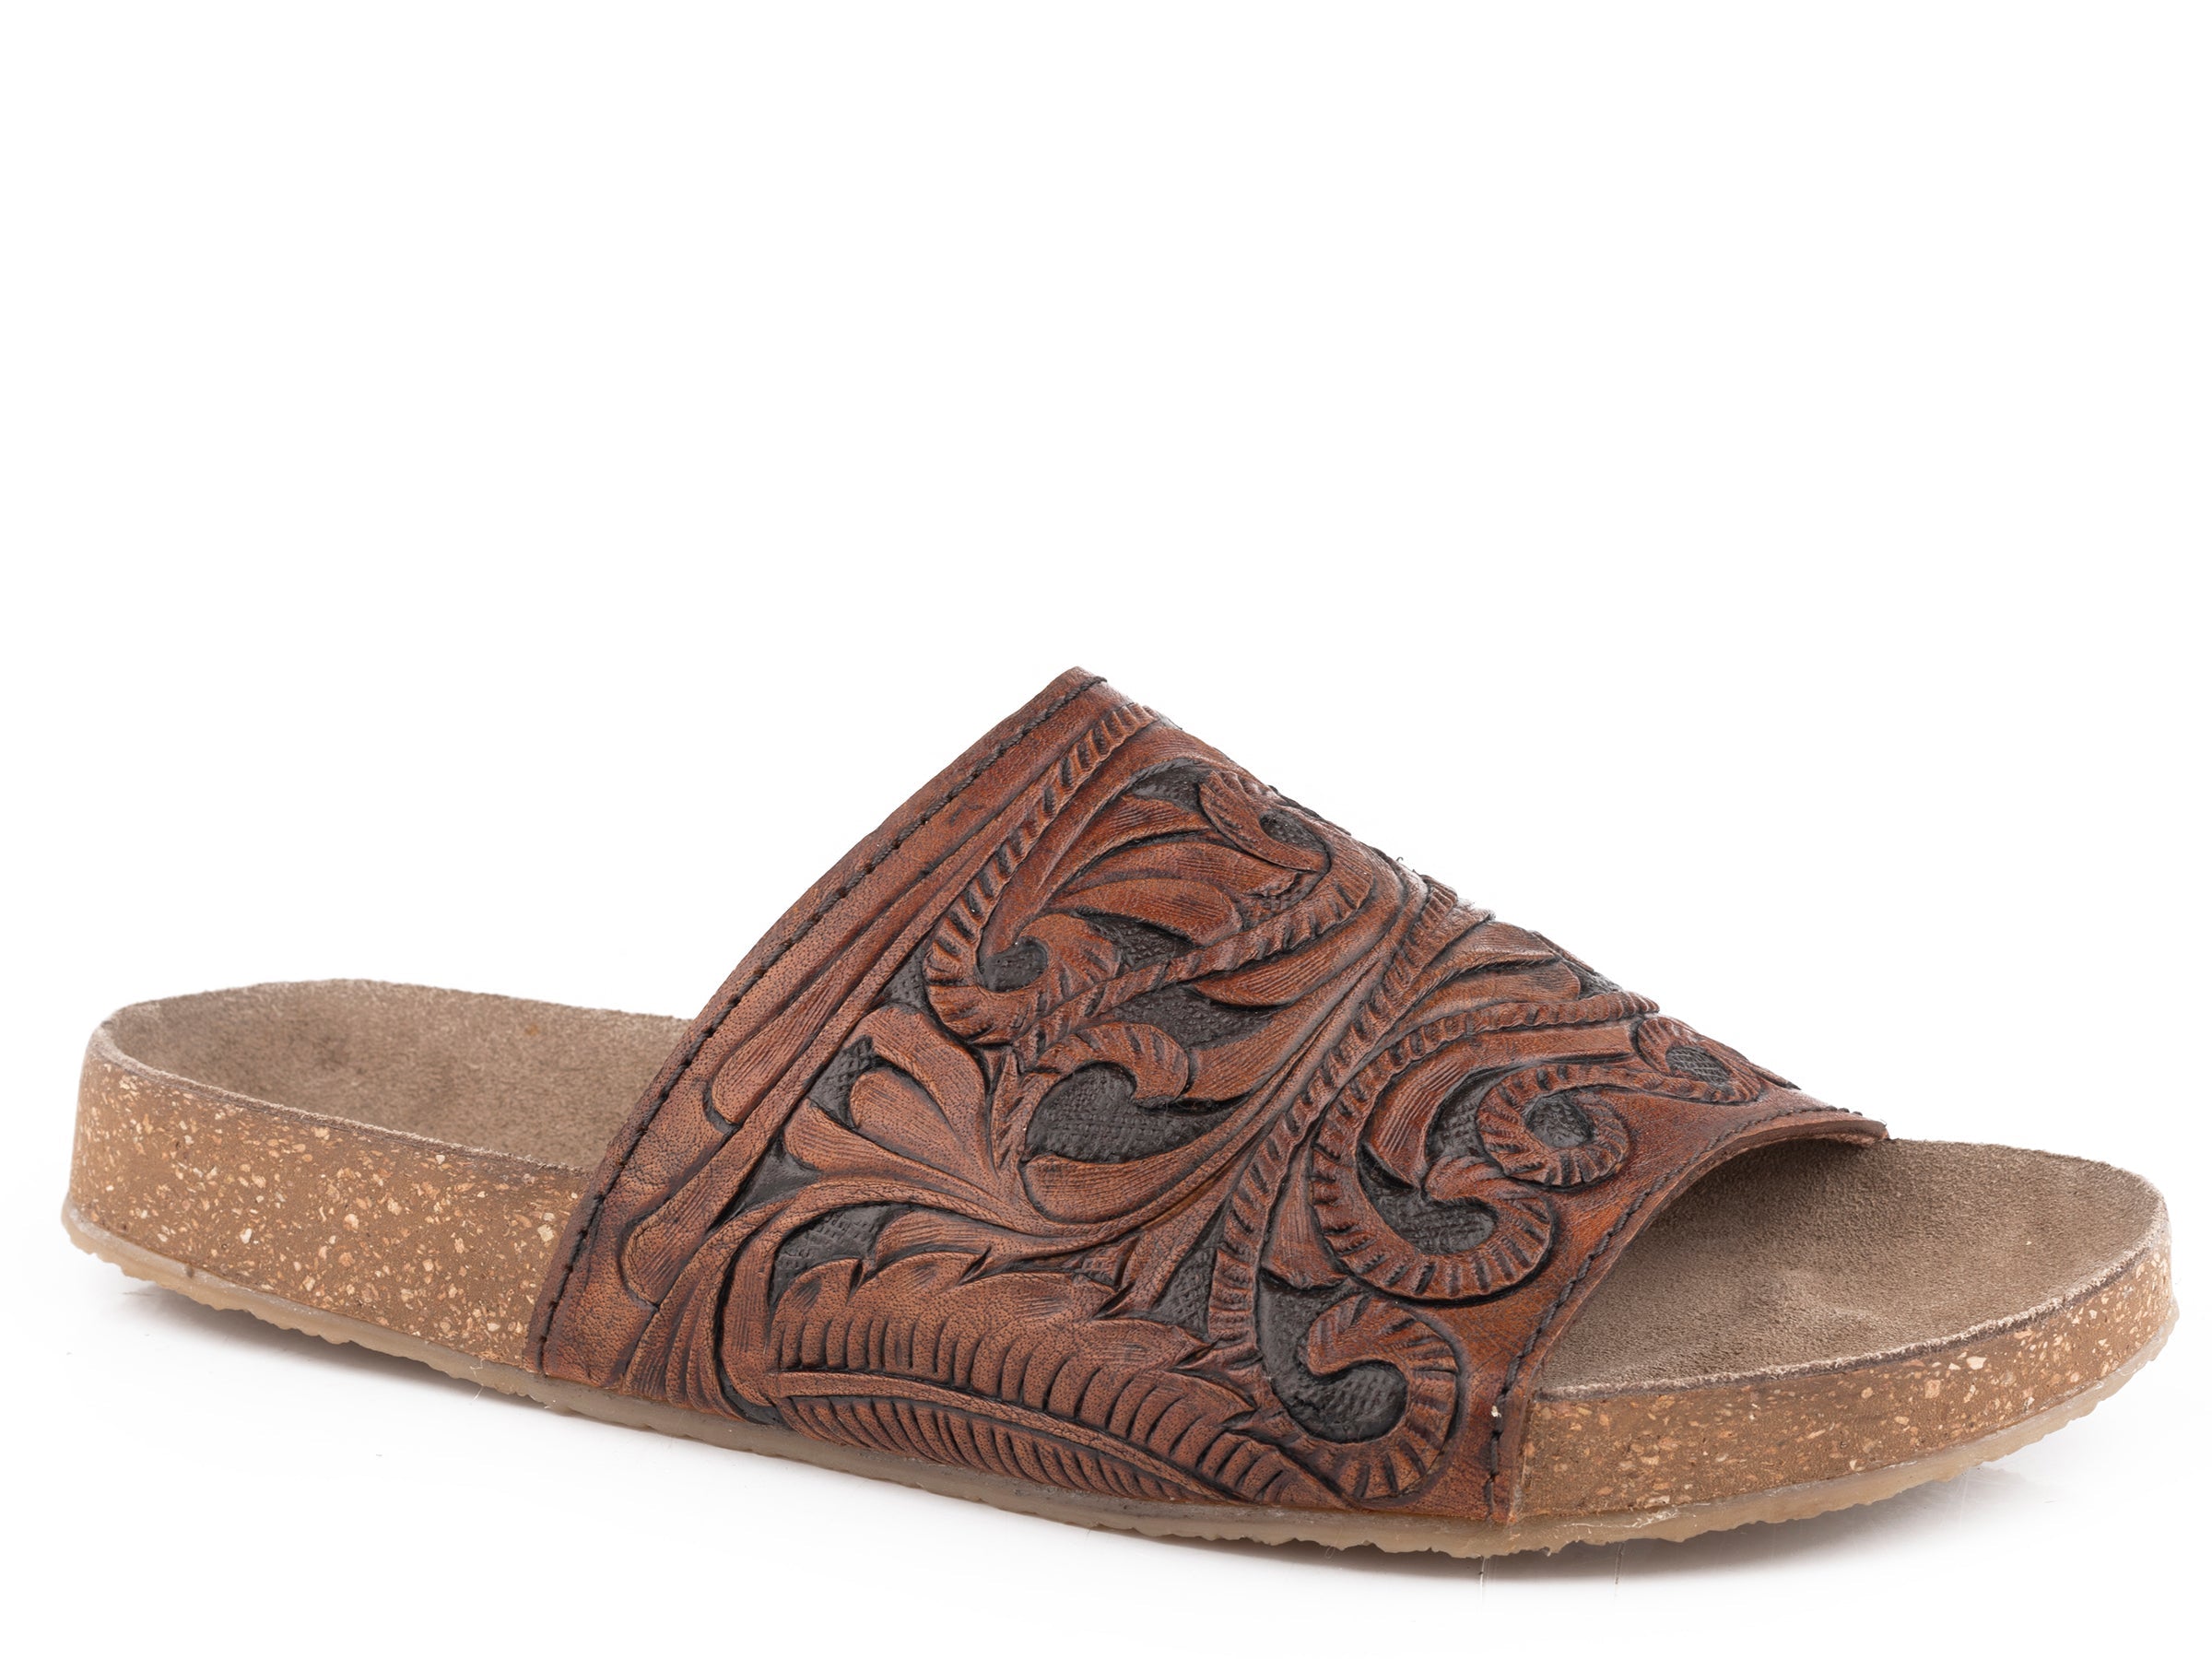 Roper Womens Cognac And Black Tooled Leather